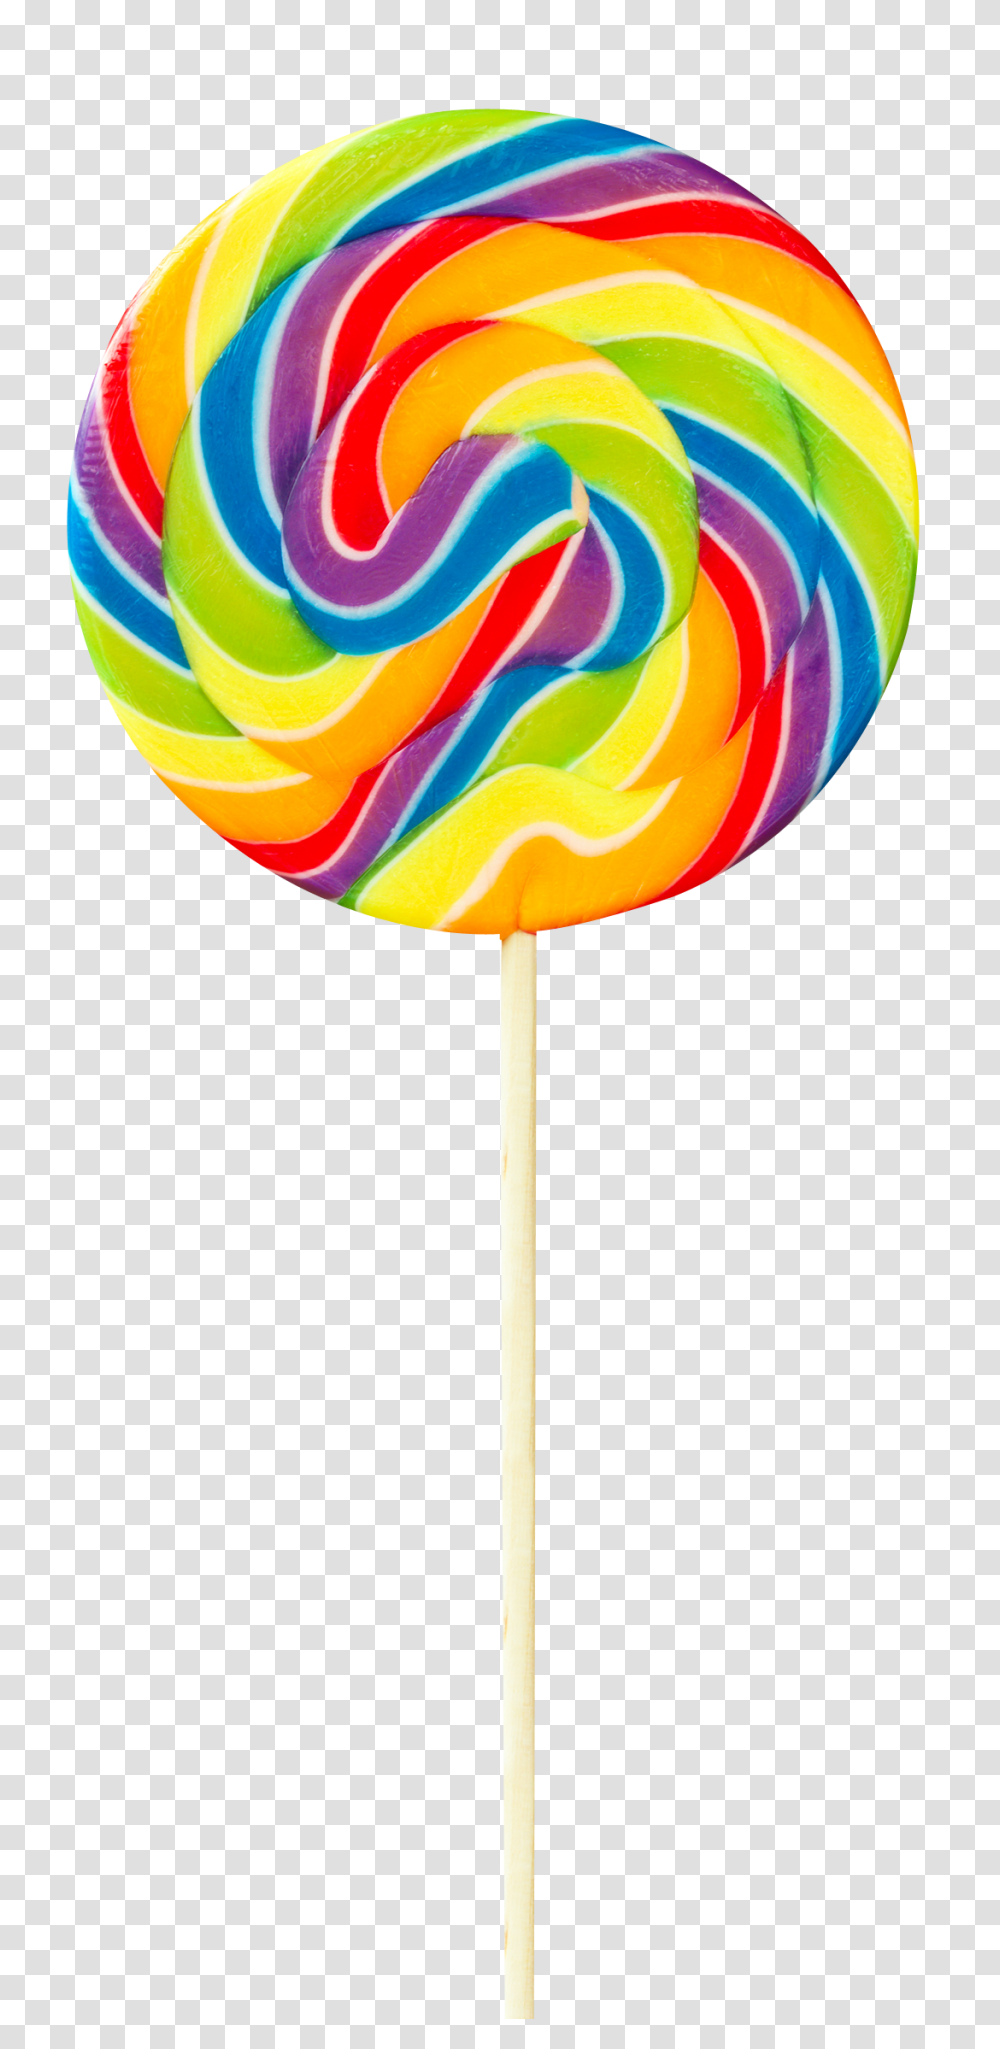 Swirl Lollipop Image, Food, Candy, Balloon Transparent Png